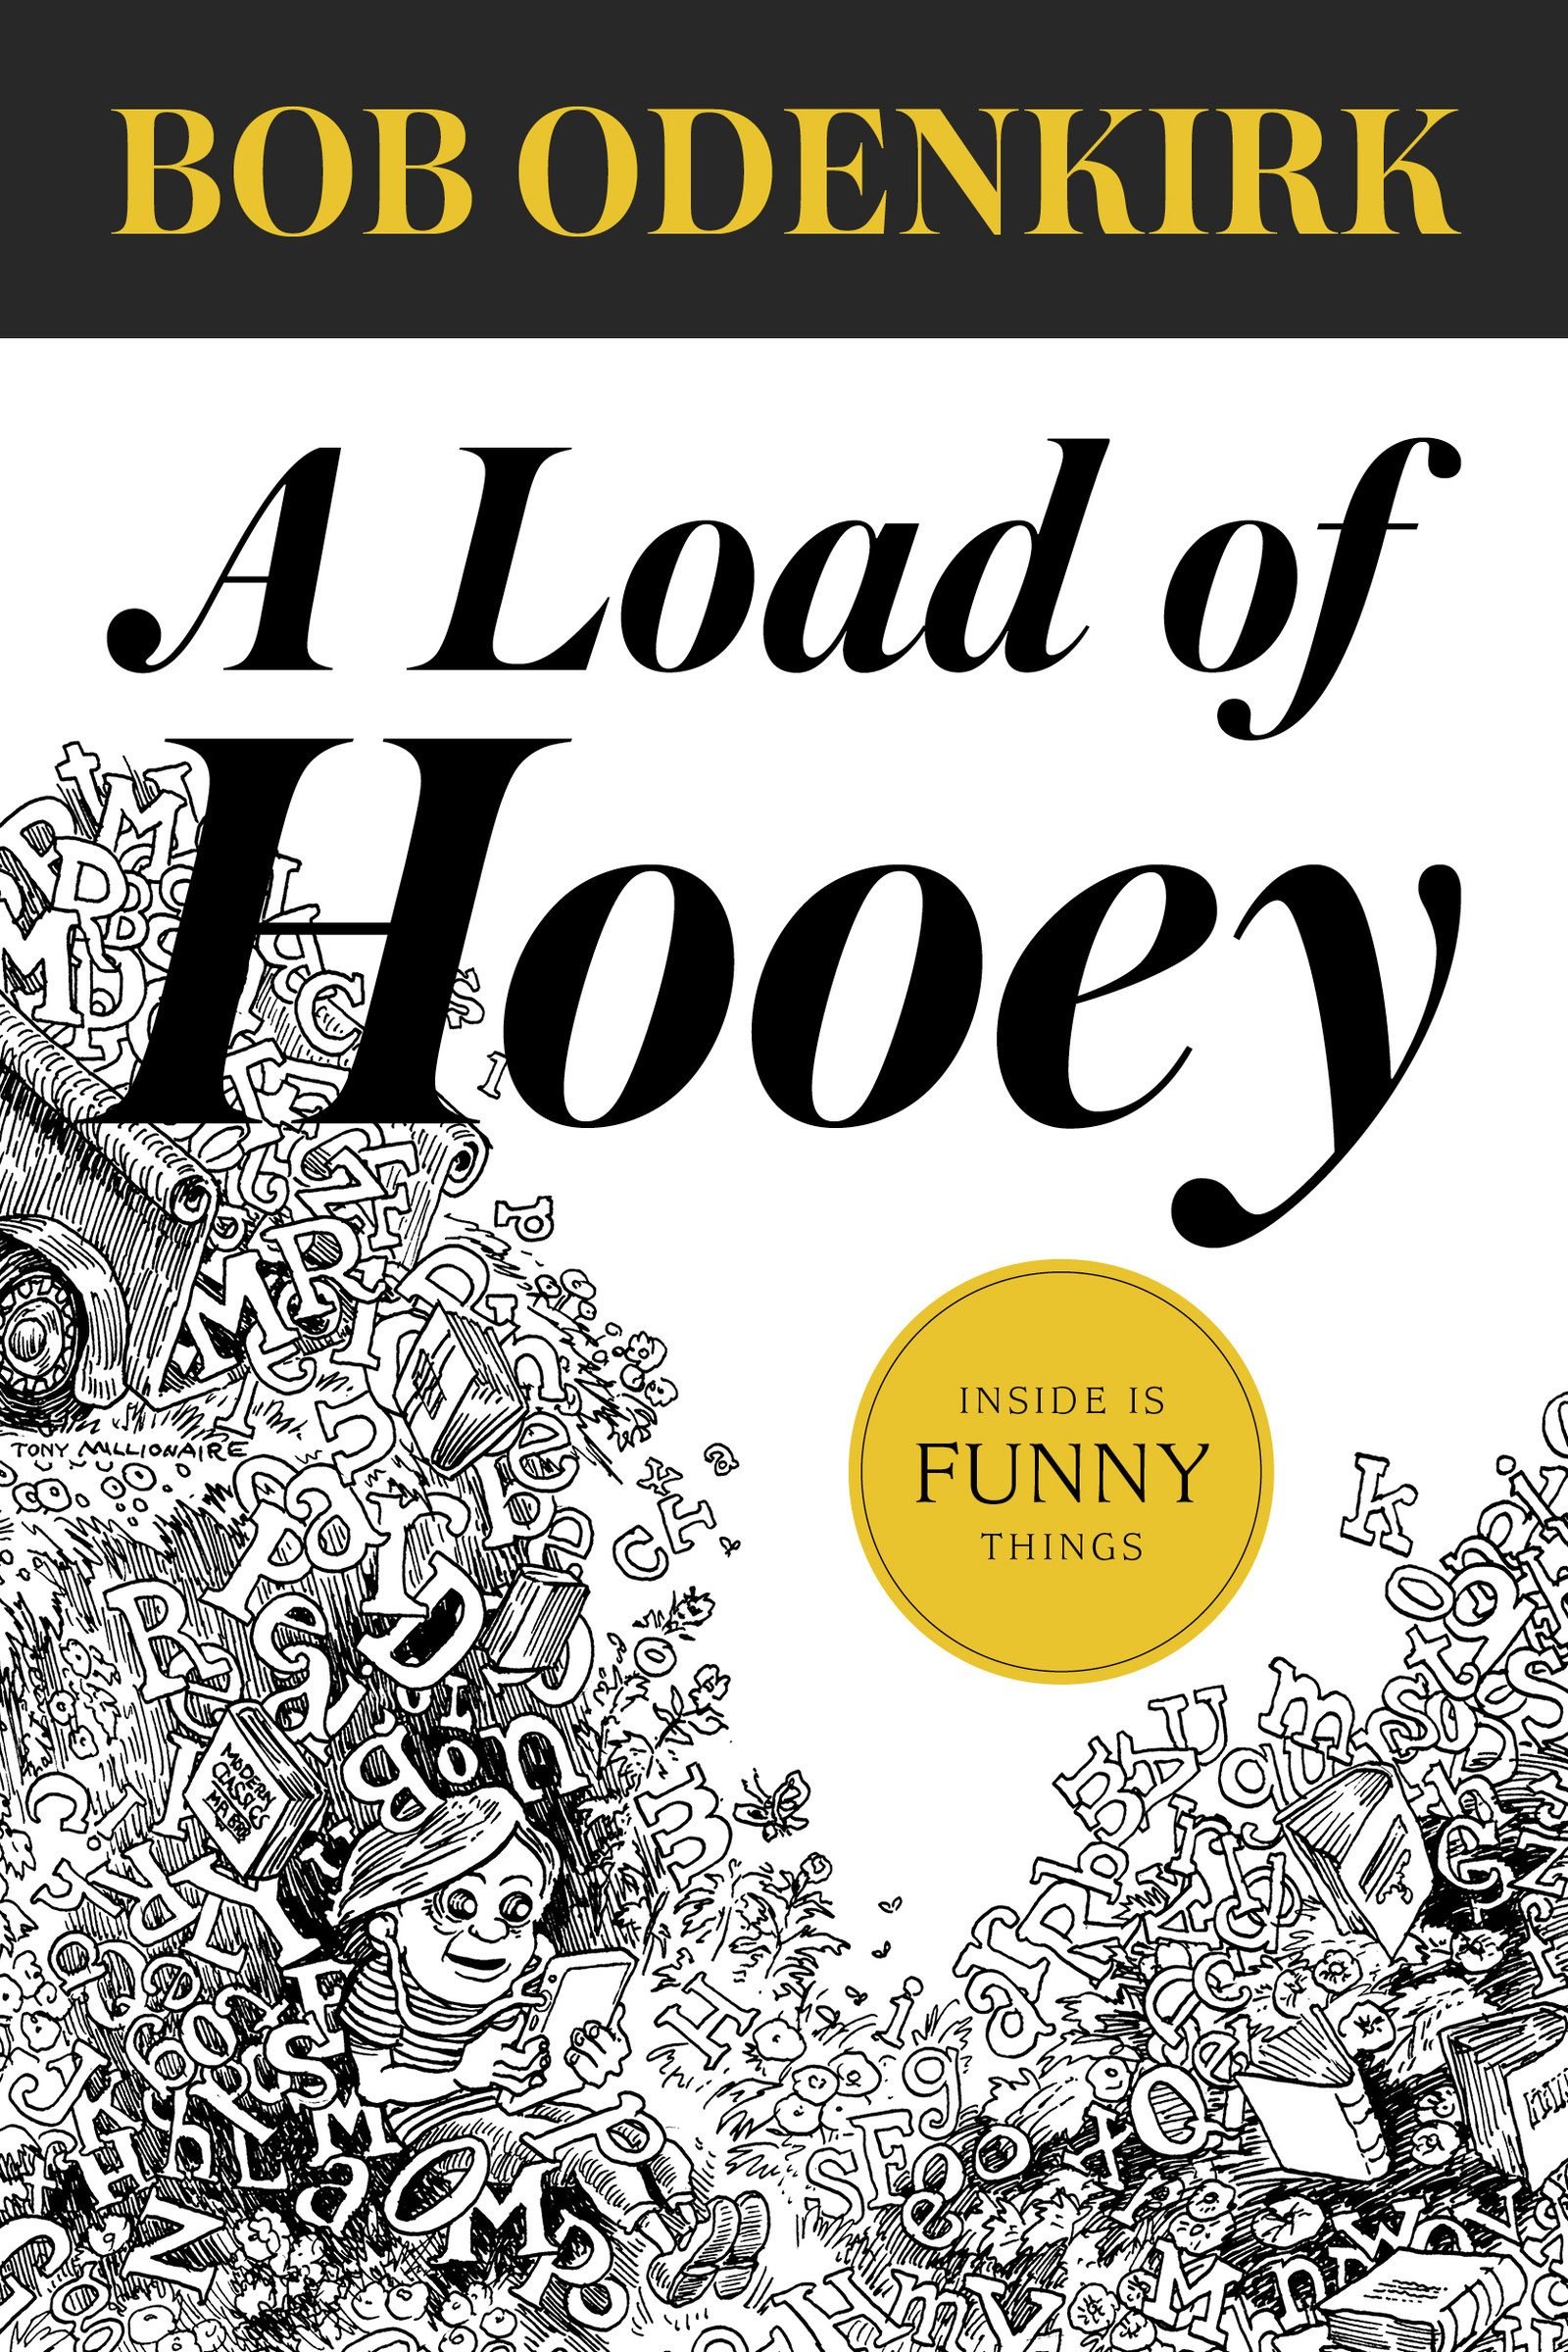 research books on humor